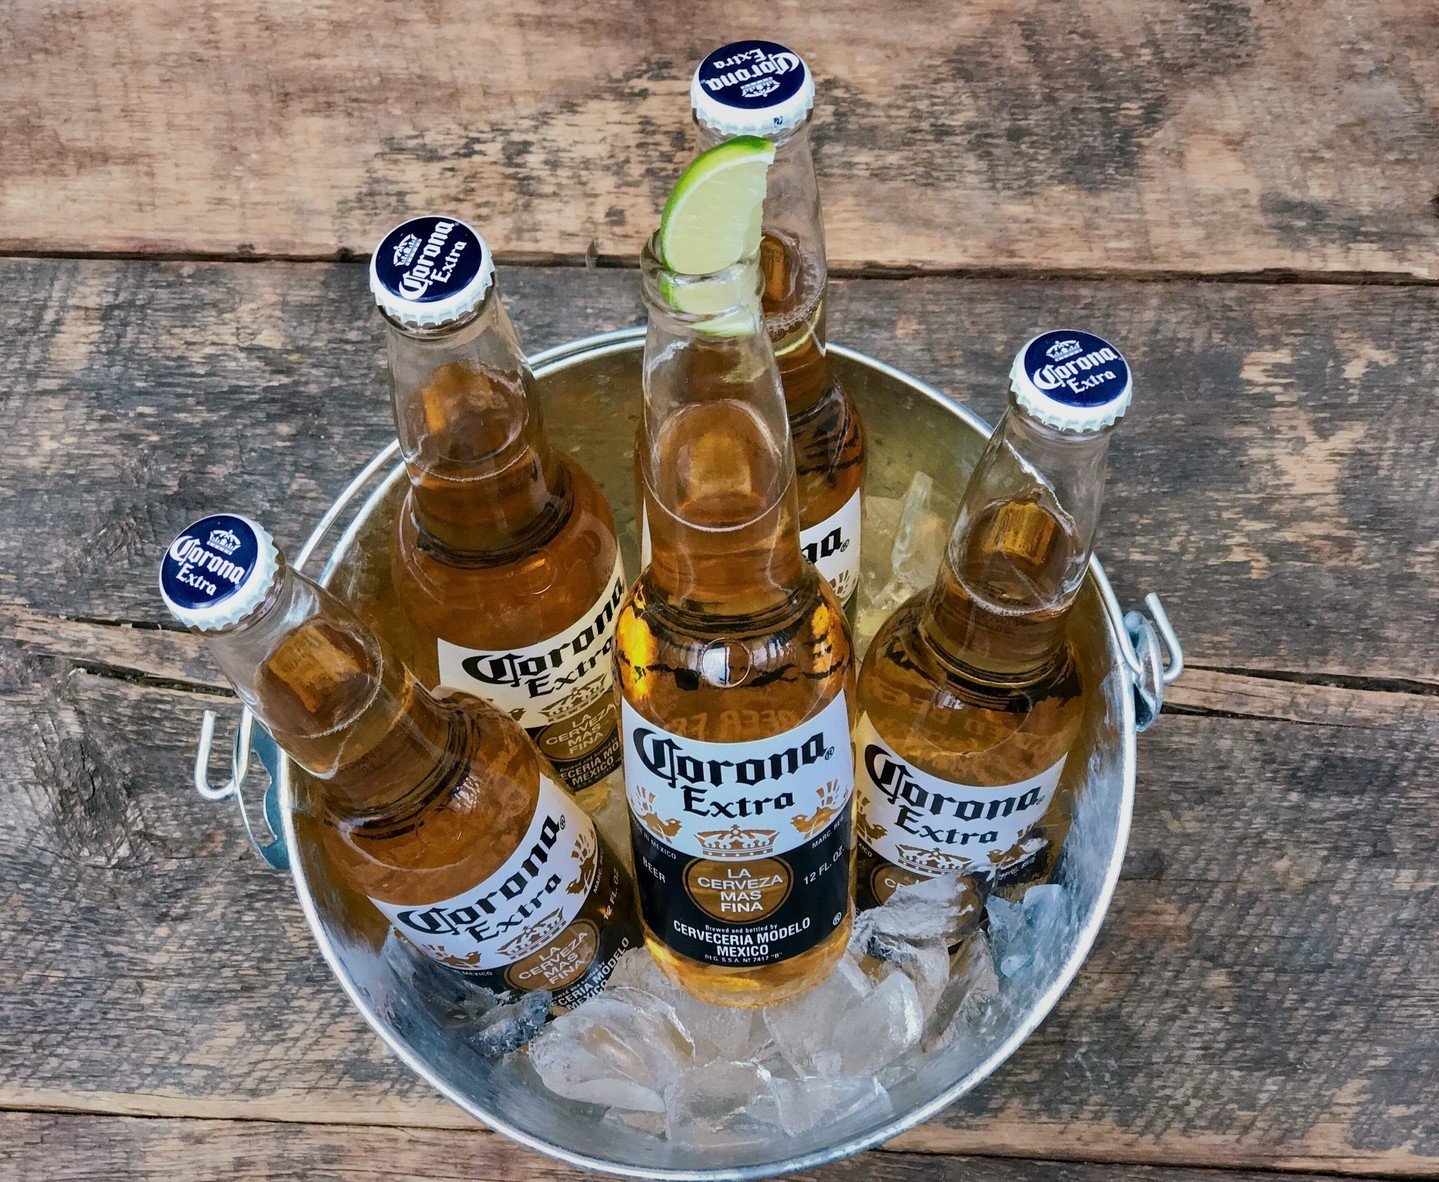 Happy Cinco de Mayo! $4 Corona and Modelo all day + $16 Steak Fajitas with Mexican Rice and Refried Beans + $6 Termana Blanco shots, and $10 Maker's Mark Mint Juleps. Cheers to Sunday Funday! 
.
.
.
.
.
(pic: TLM) #chicagofoodanddrink #chicagofoodaut